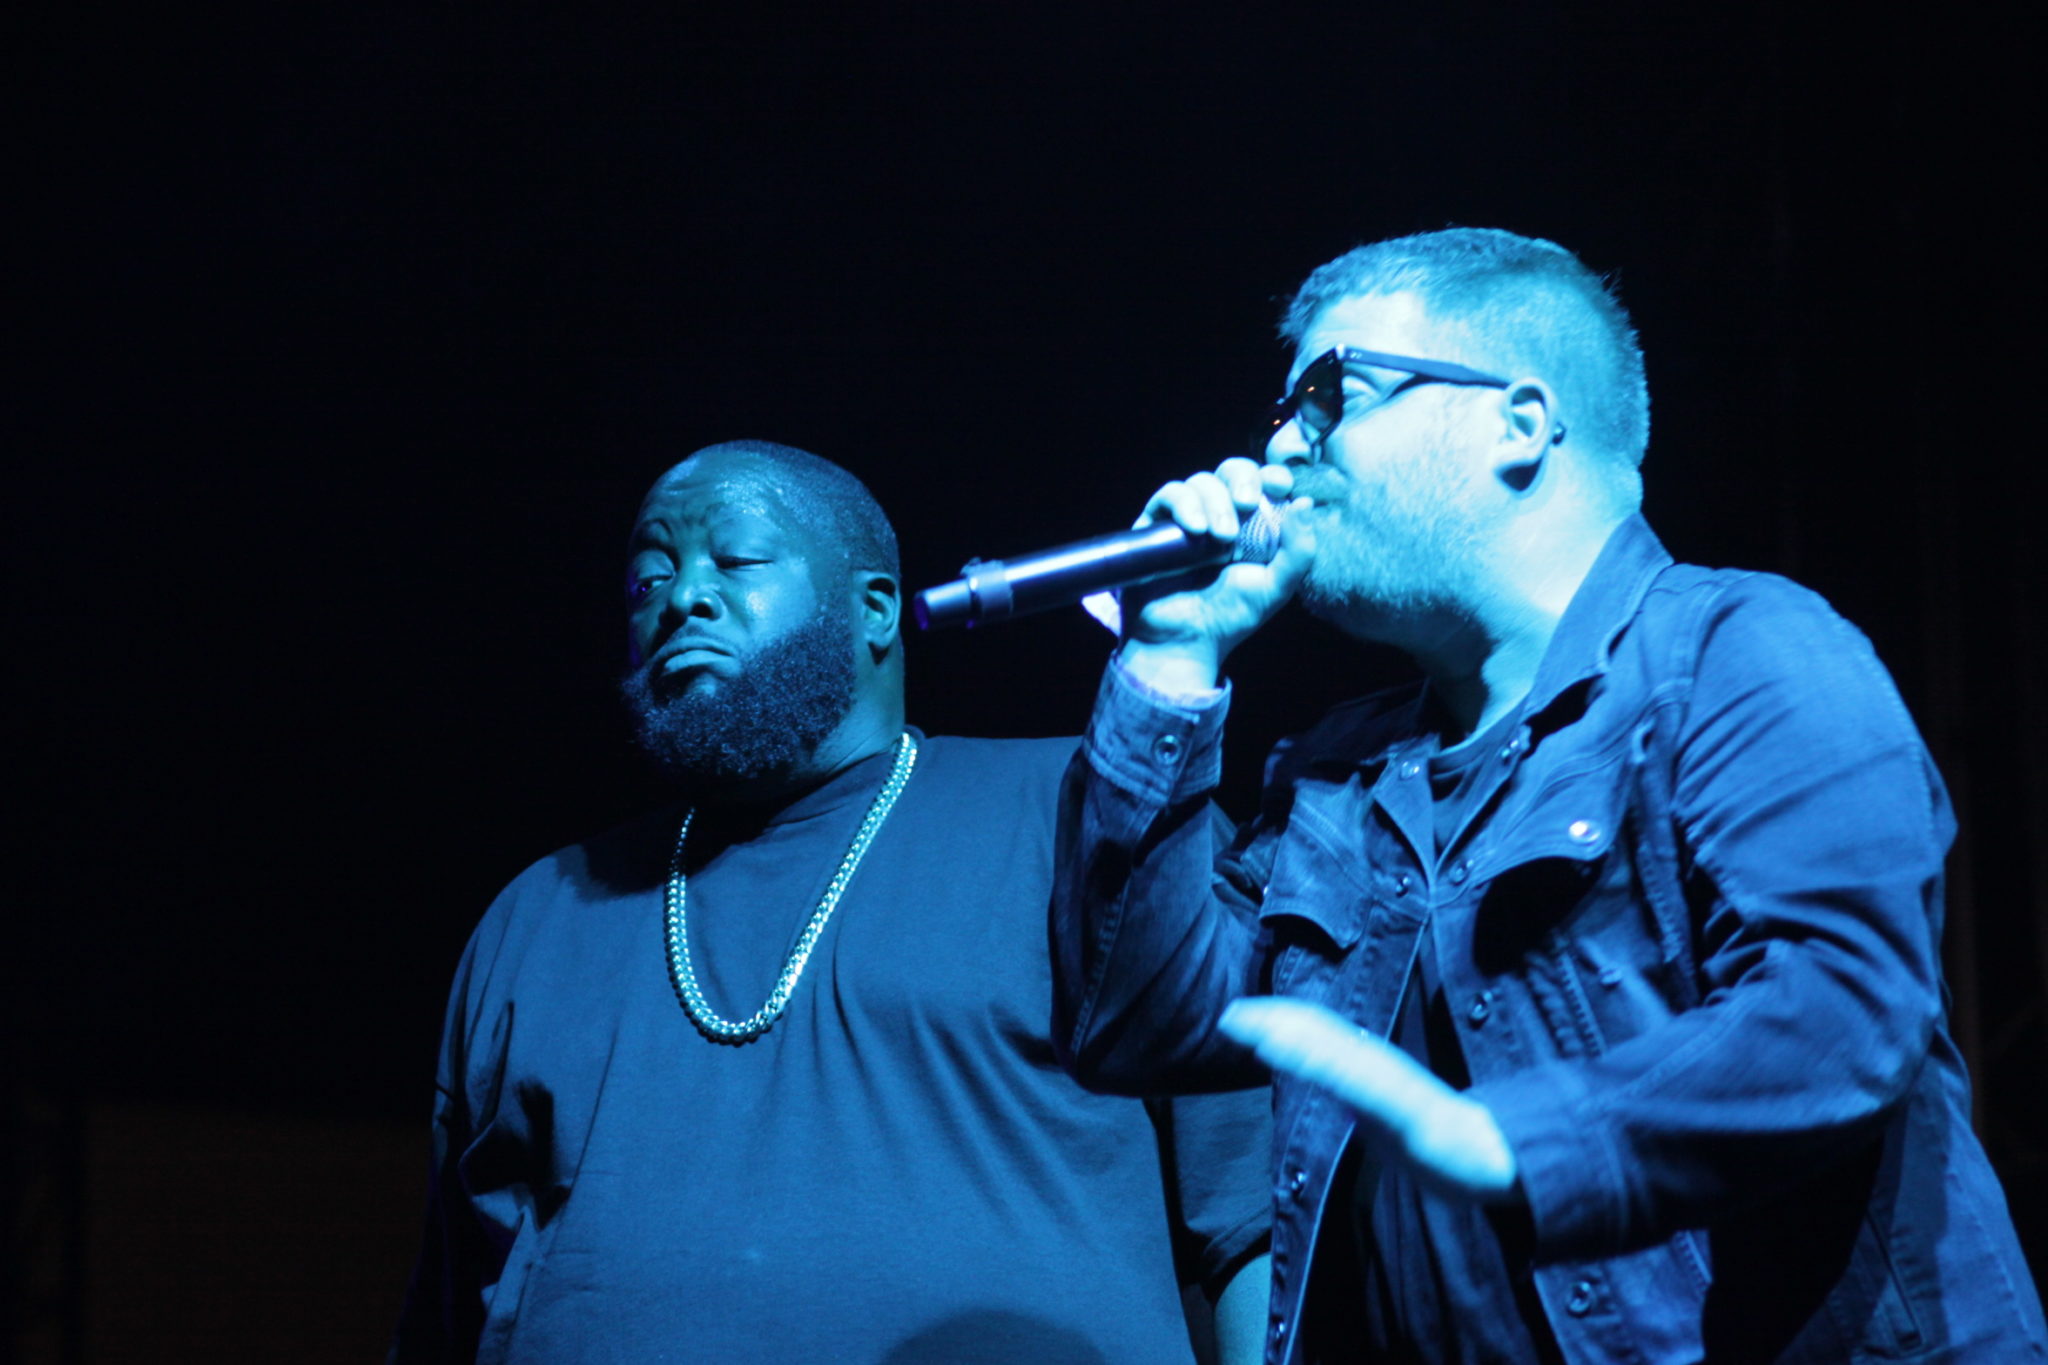 Run The Jewels live onstage at the 2017 FYF Festival in Los Angeles, CA